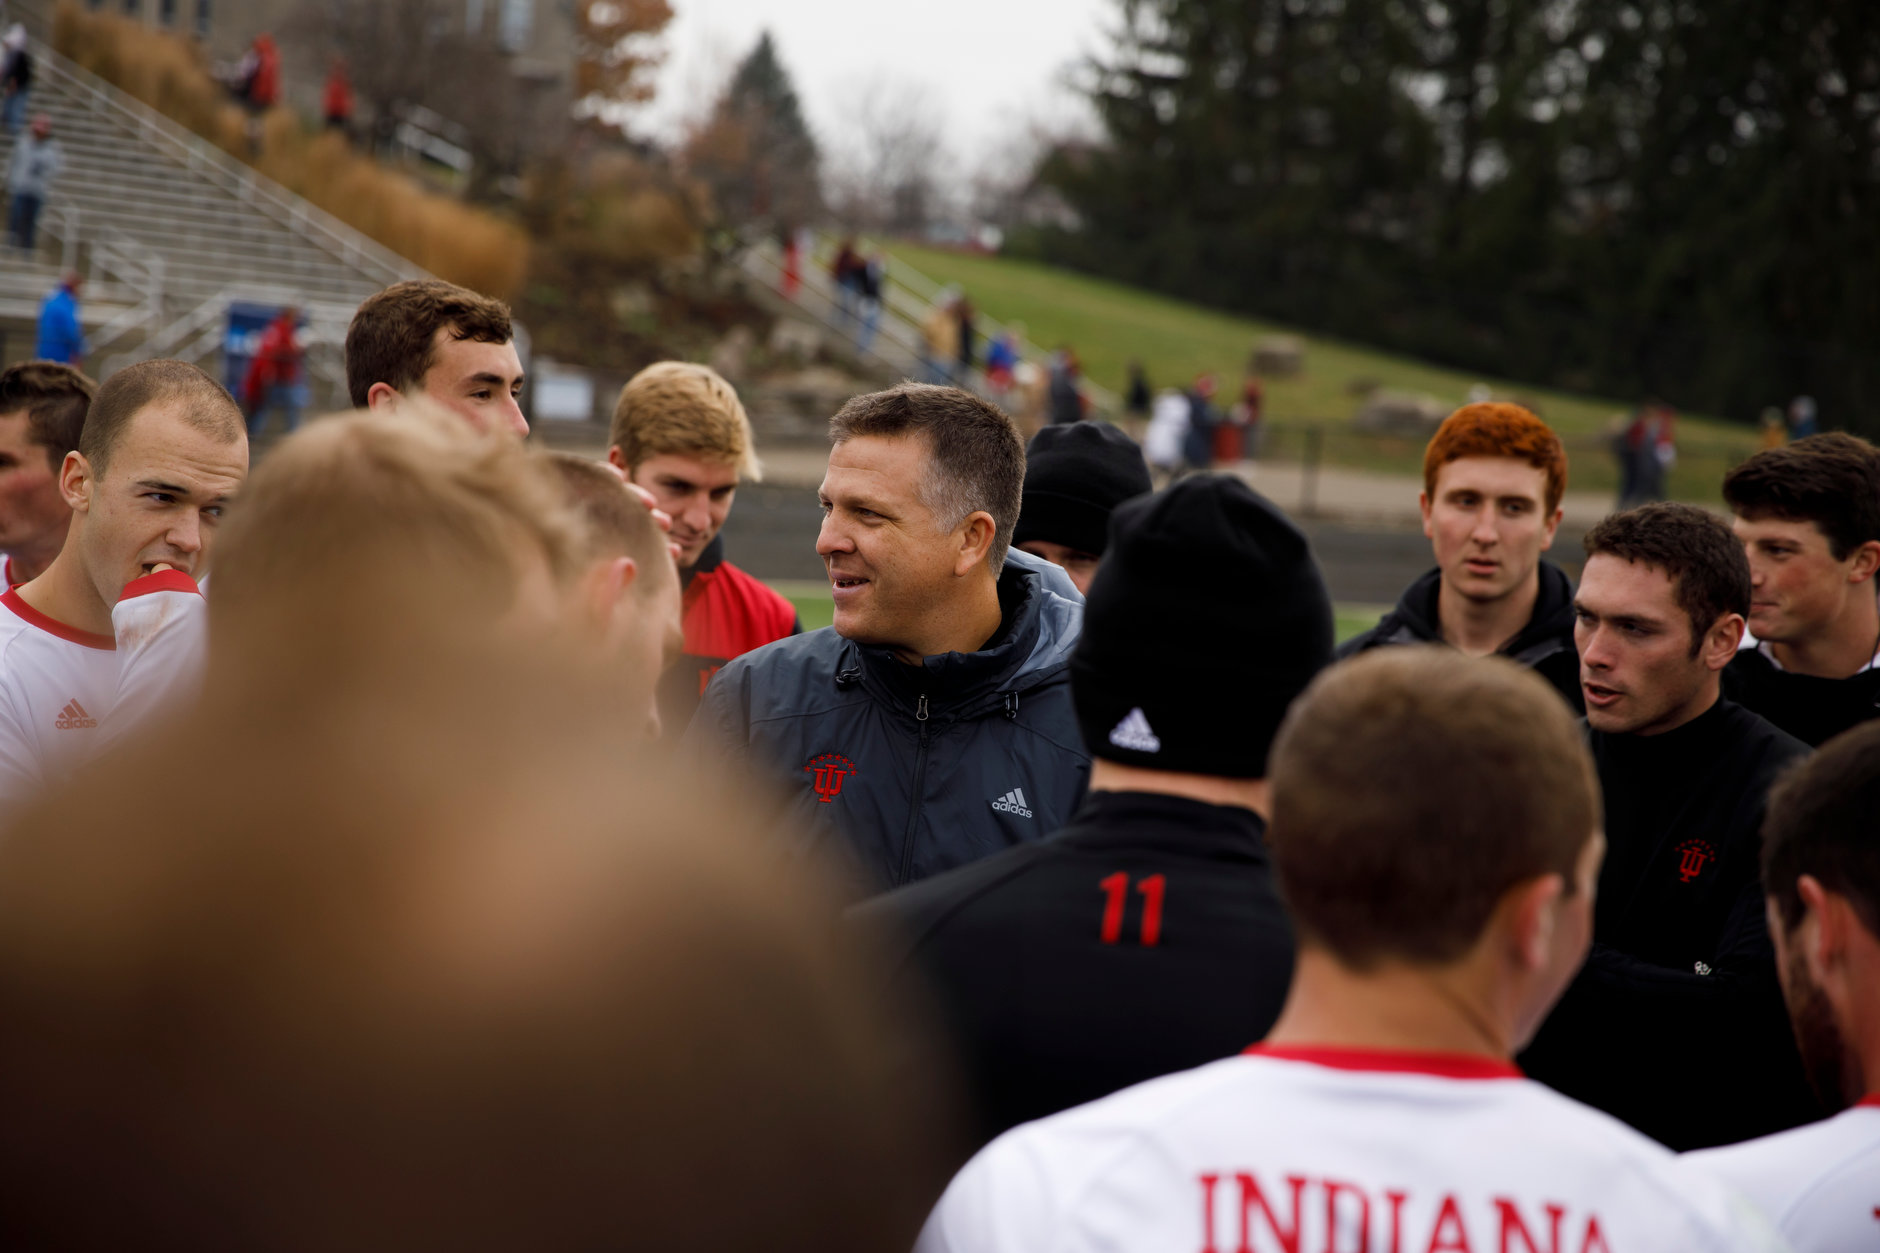 Indiana head coach Todd Yeagley speaks with his players following a 4-0 win against Connecticut in an NCAA men's soccer tournament match at Bill Armstrong Stadium in Bloomington, Ind. on Sunday, Nov. 18, 2018. (James Brosher for The Herald-Times)